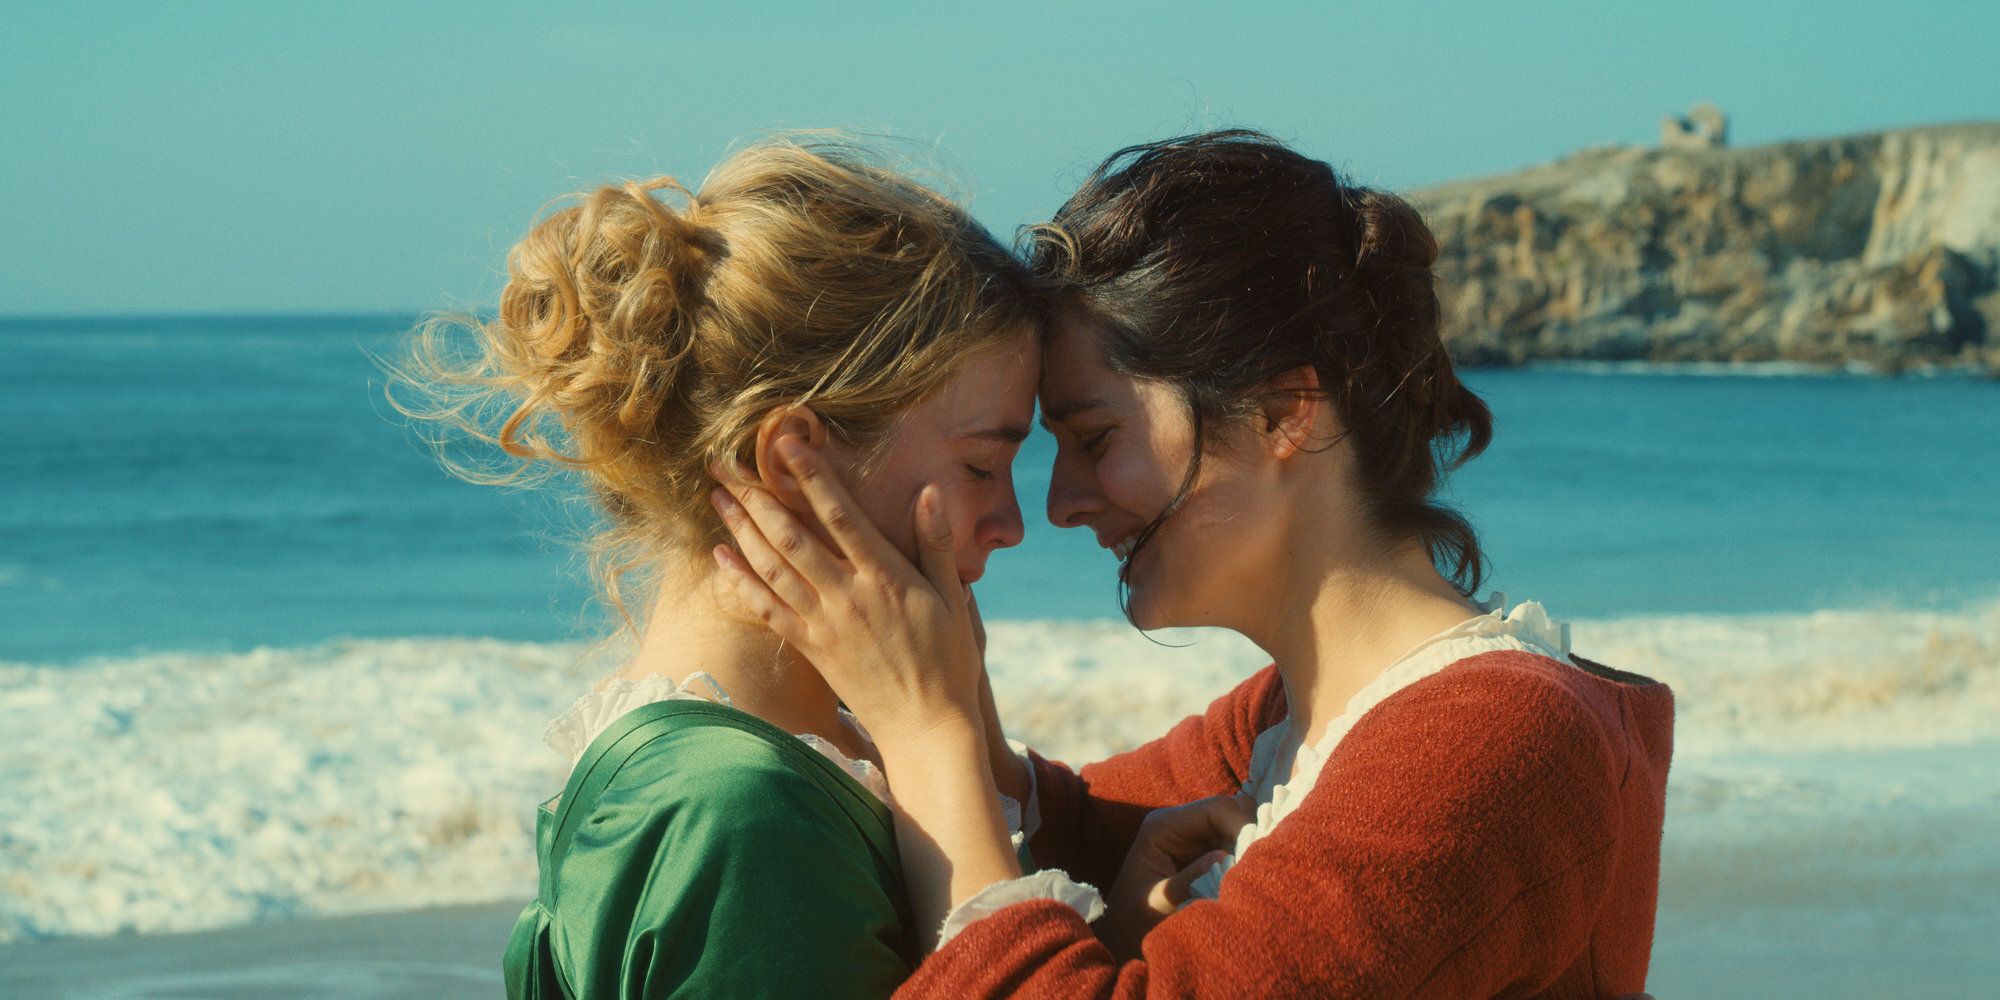 Noémie Merlant holding Adèle Haenel's face in her hands and touching foreheads in 'Portrait of a Lady on Fire'